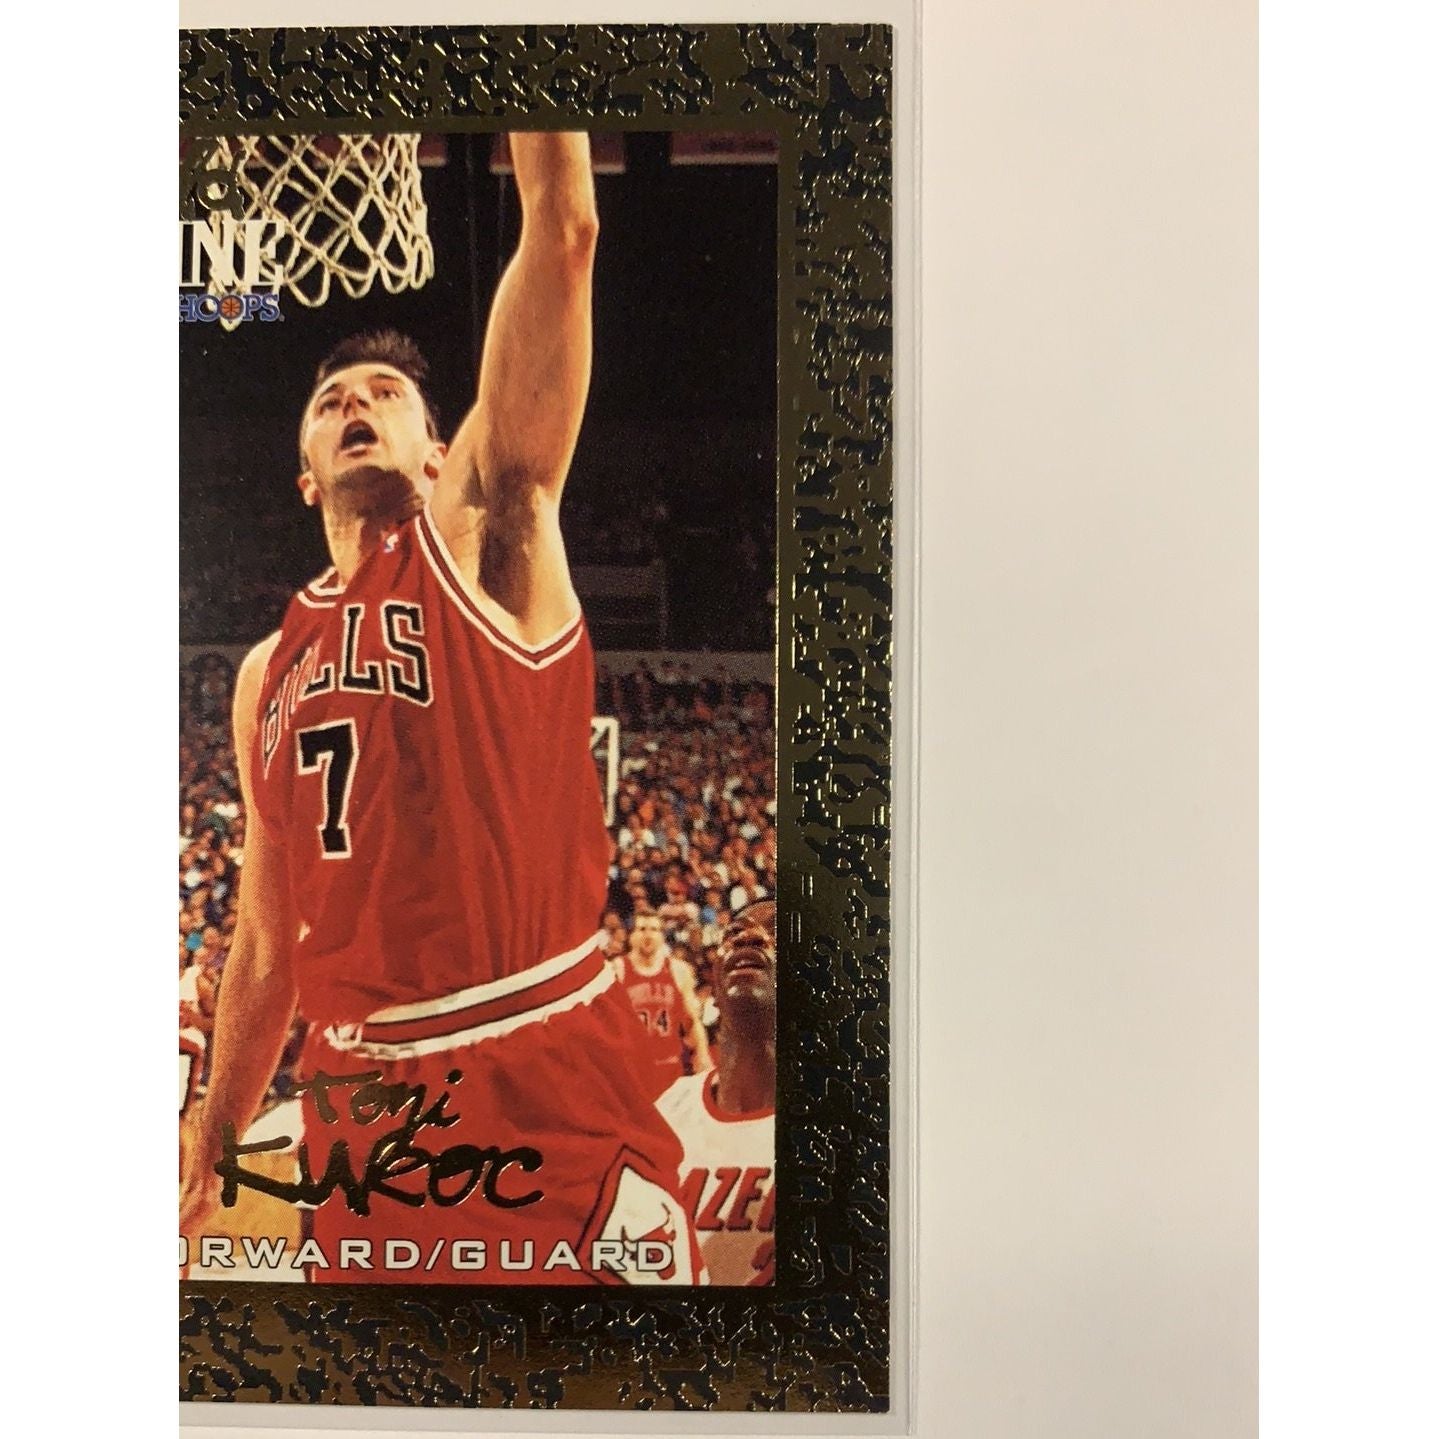  1995 NBA Hoops Gold Mine Toni Kukoc  Local Legends Cards & Collectibles